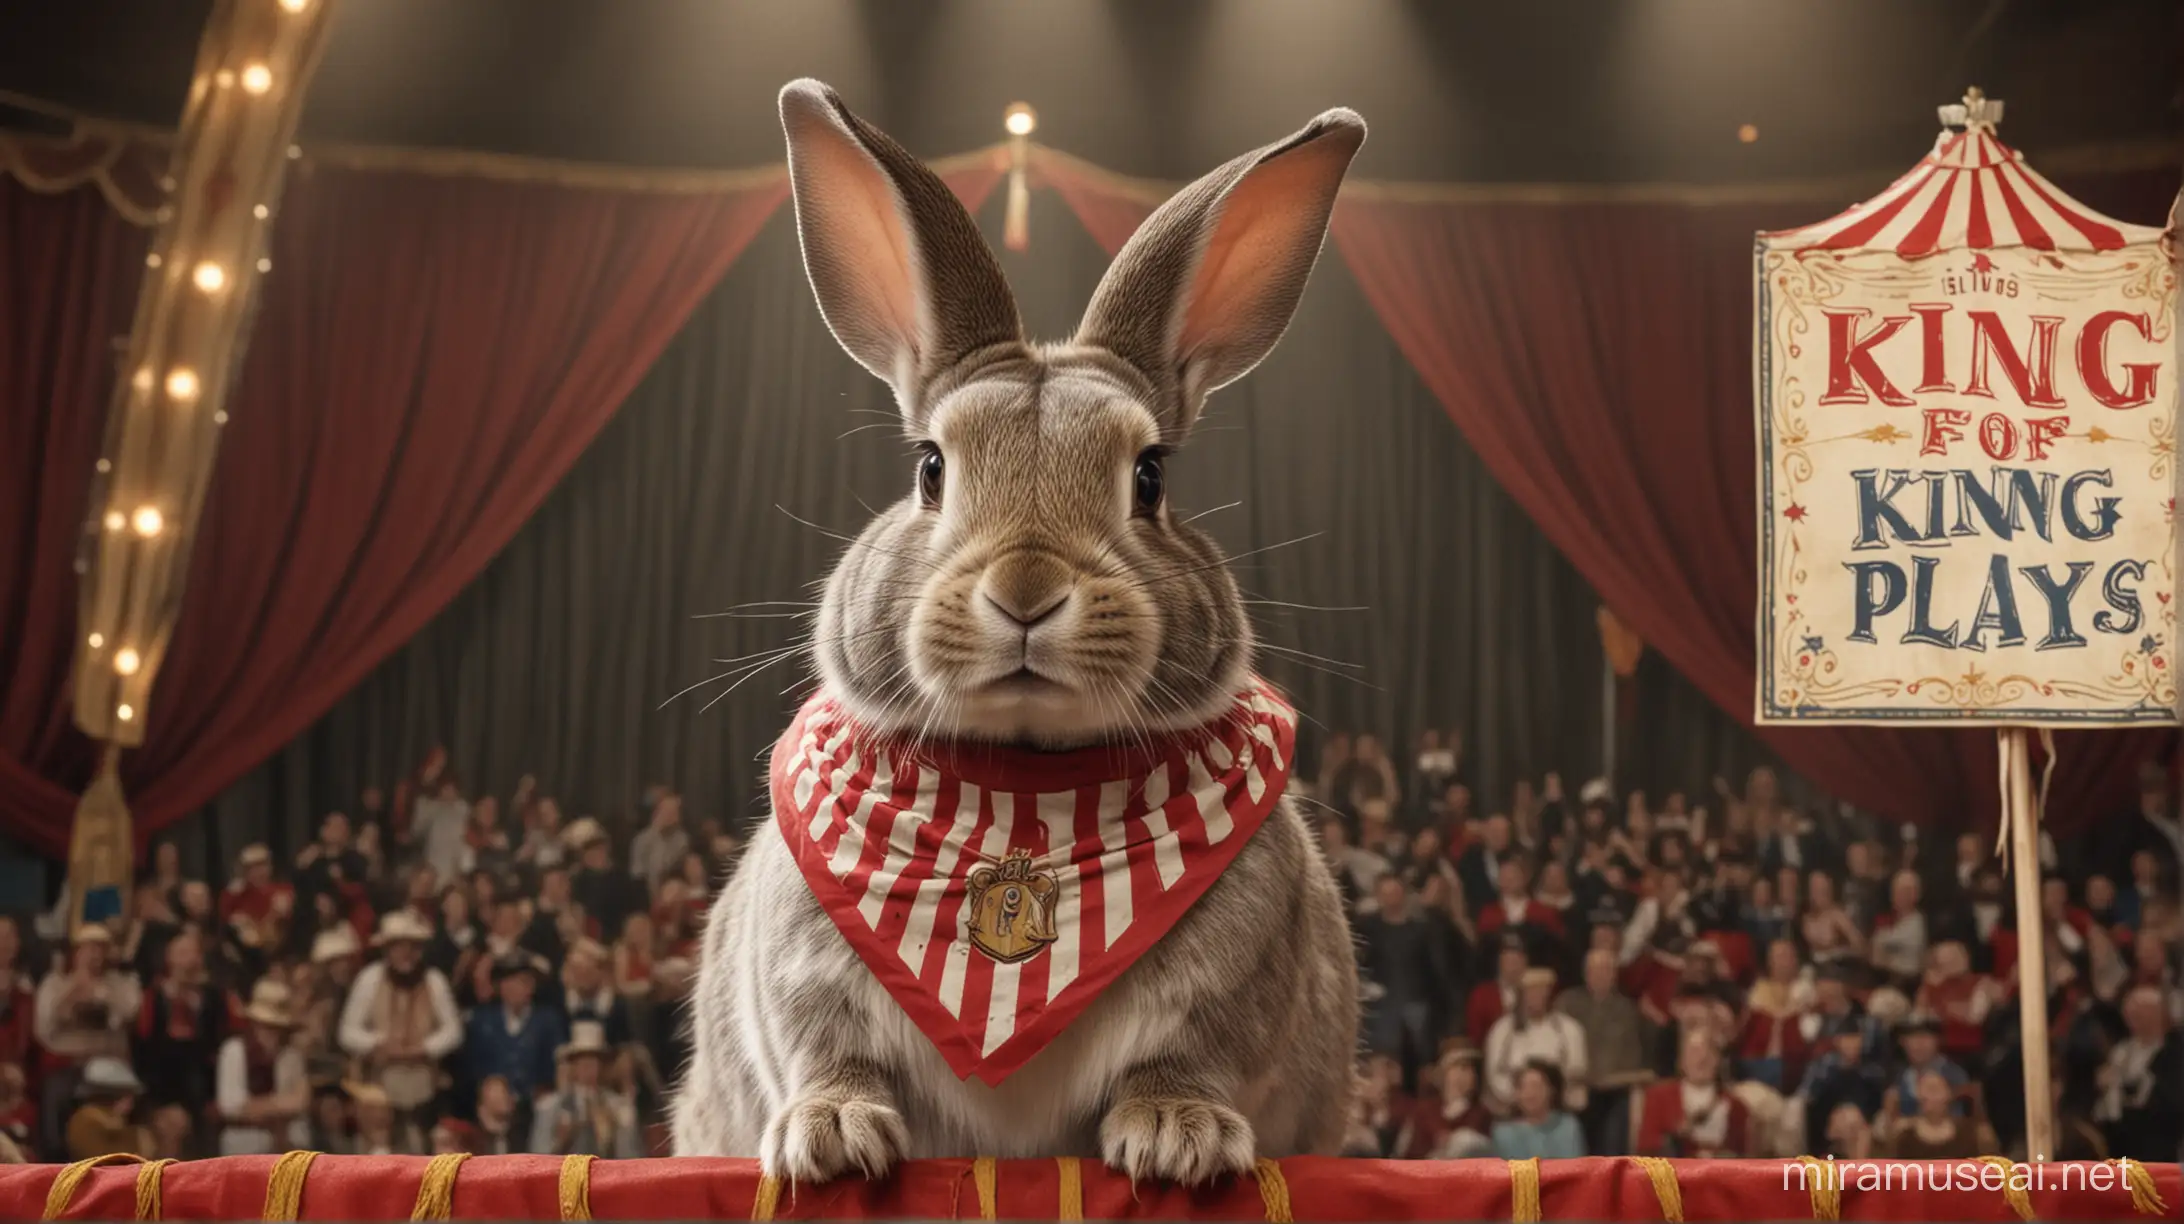 youtube thumbnail of a rabbit at a circus with a "king of plays" banner" behind it